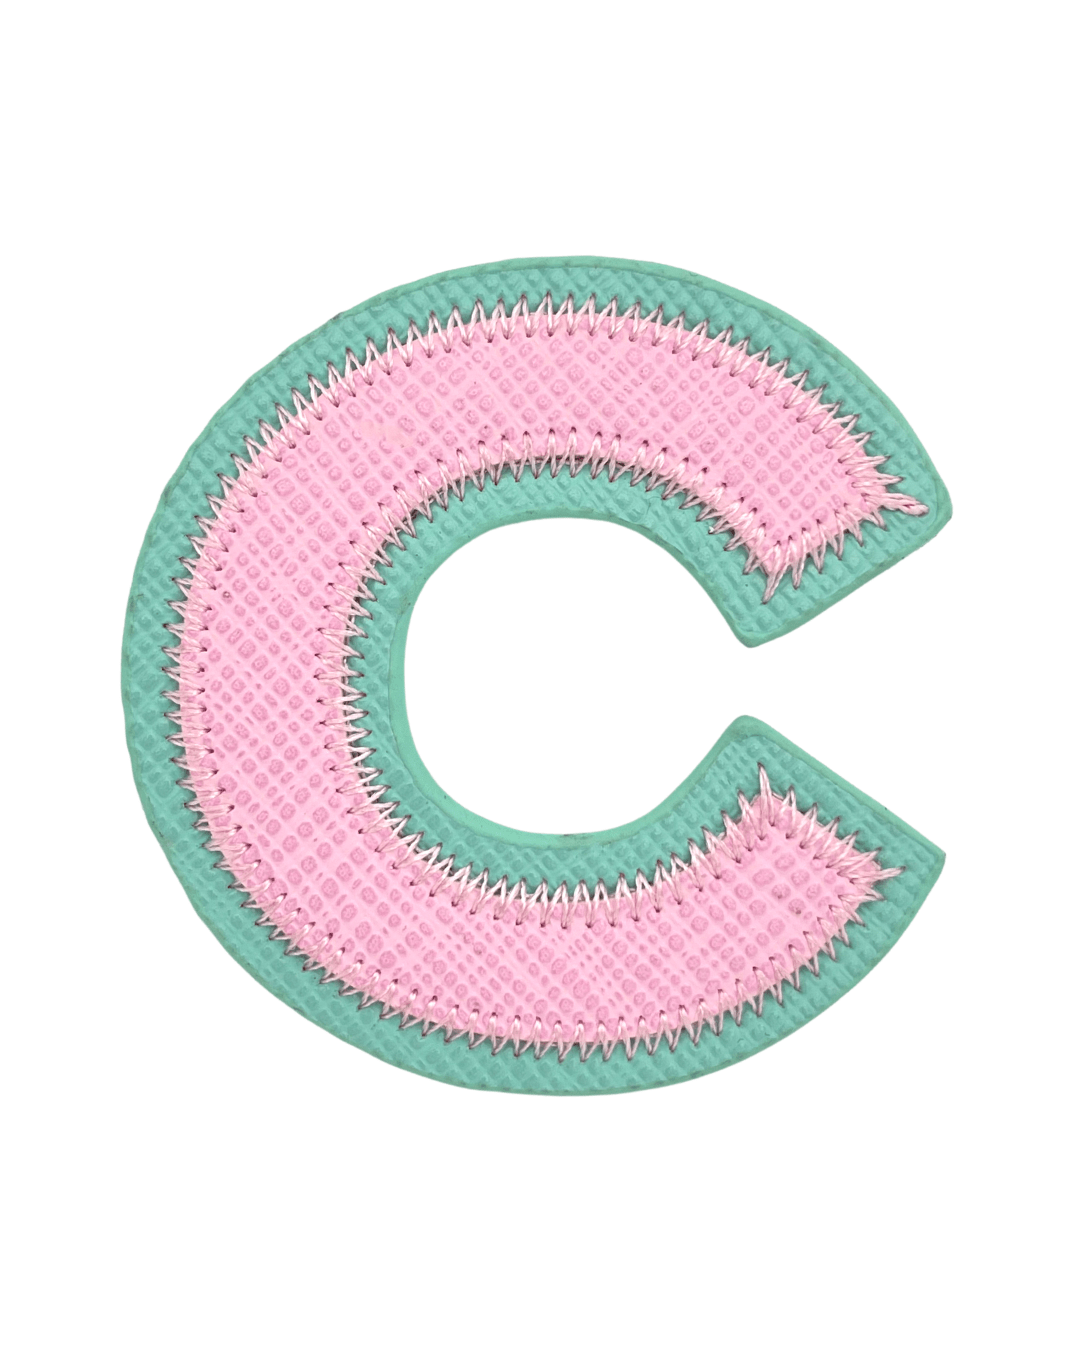 Pink + Turquoise Vegan Leather Letter Patches - American Deadstock